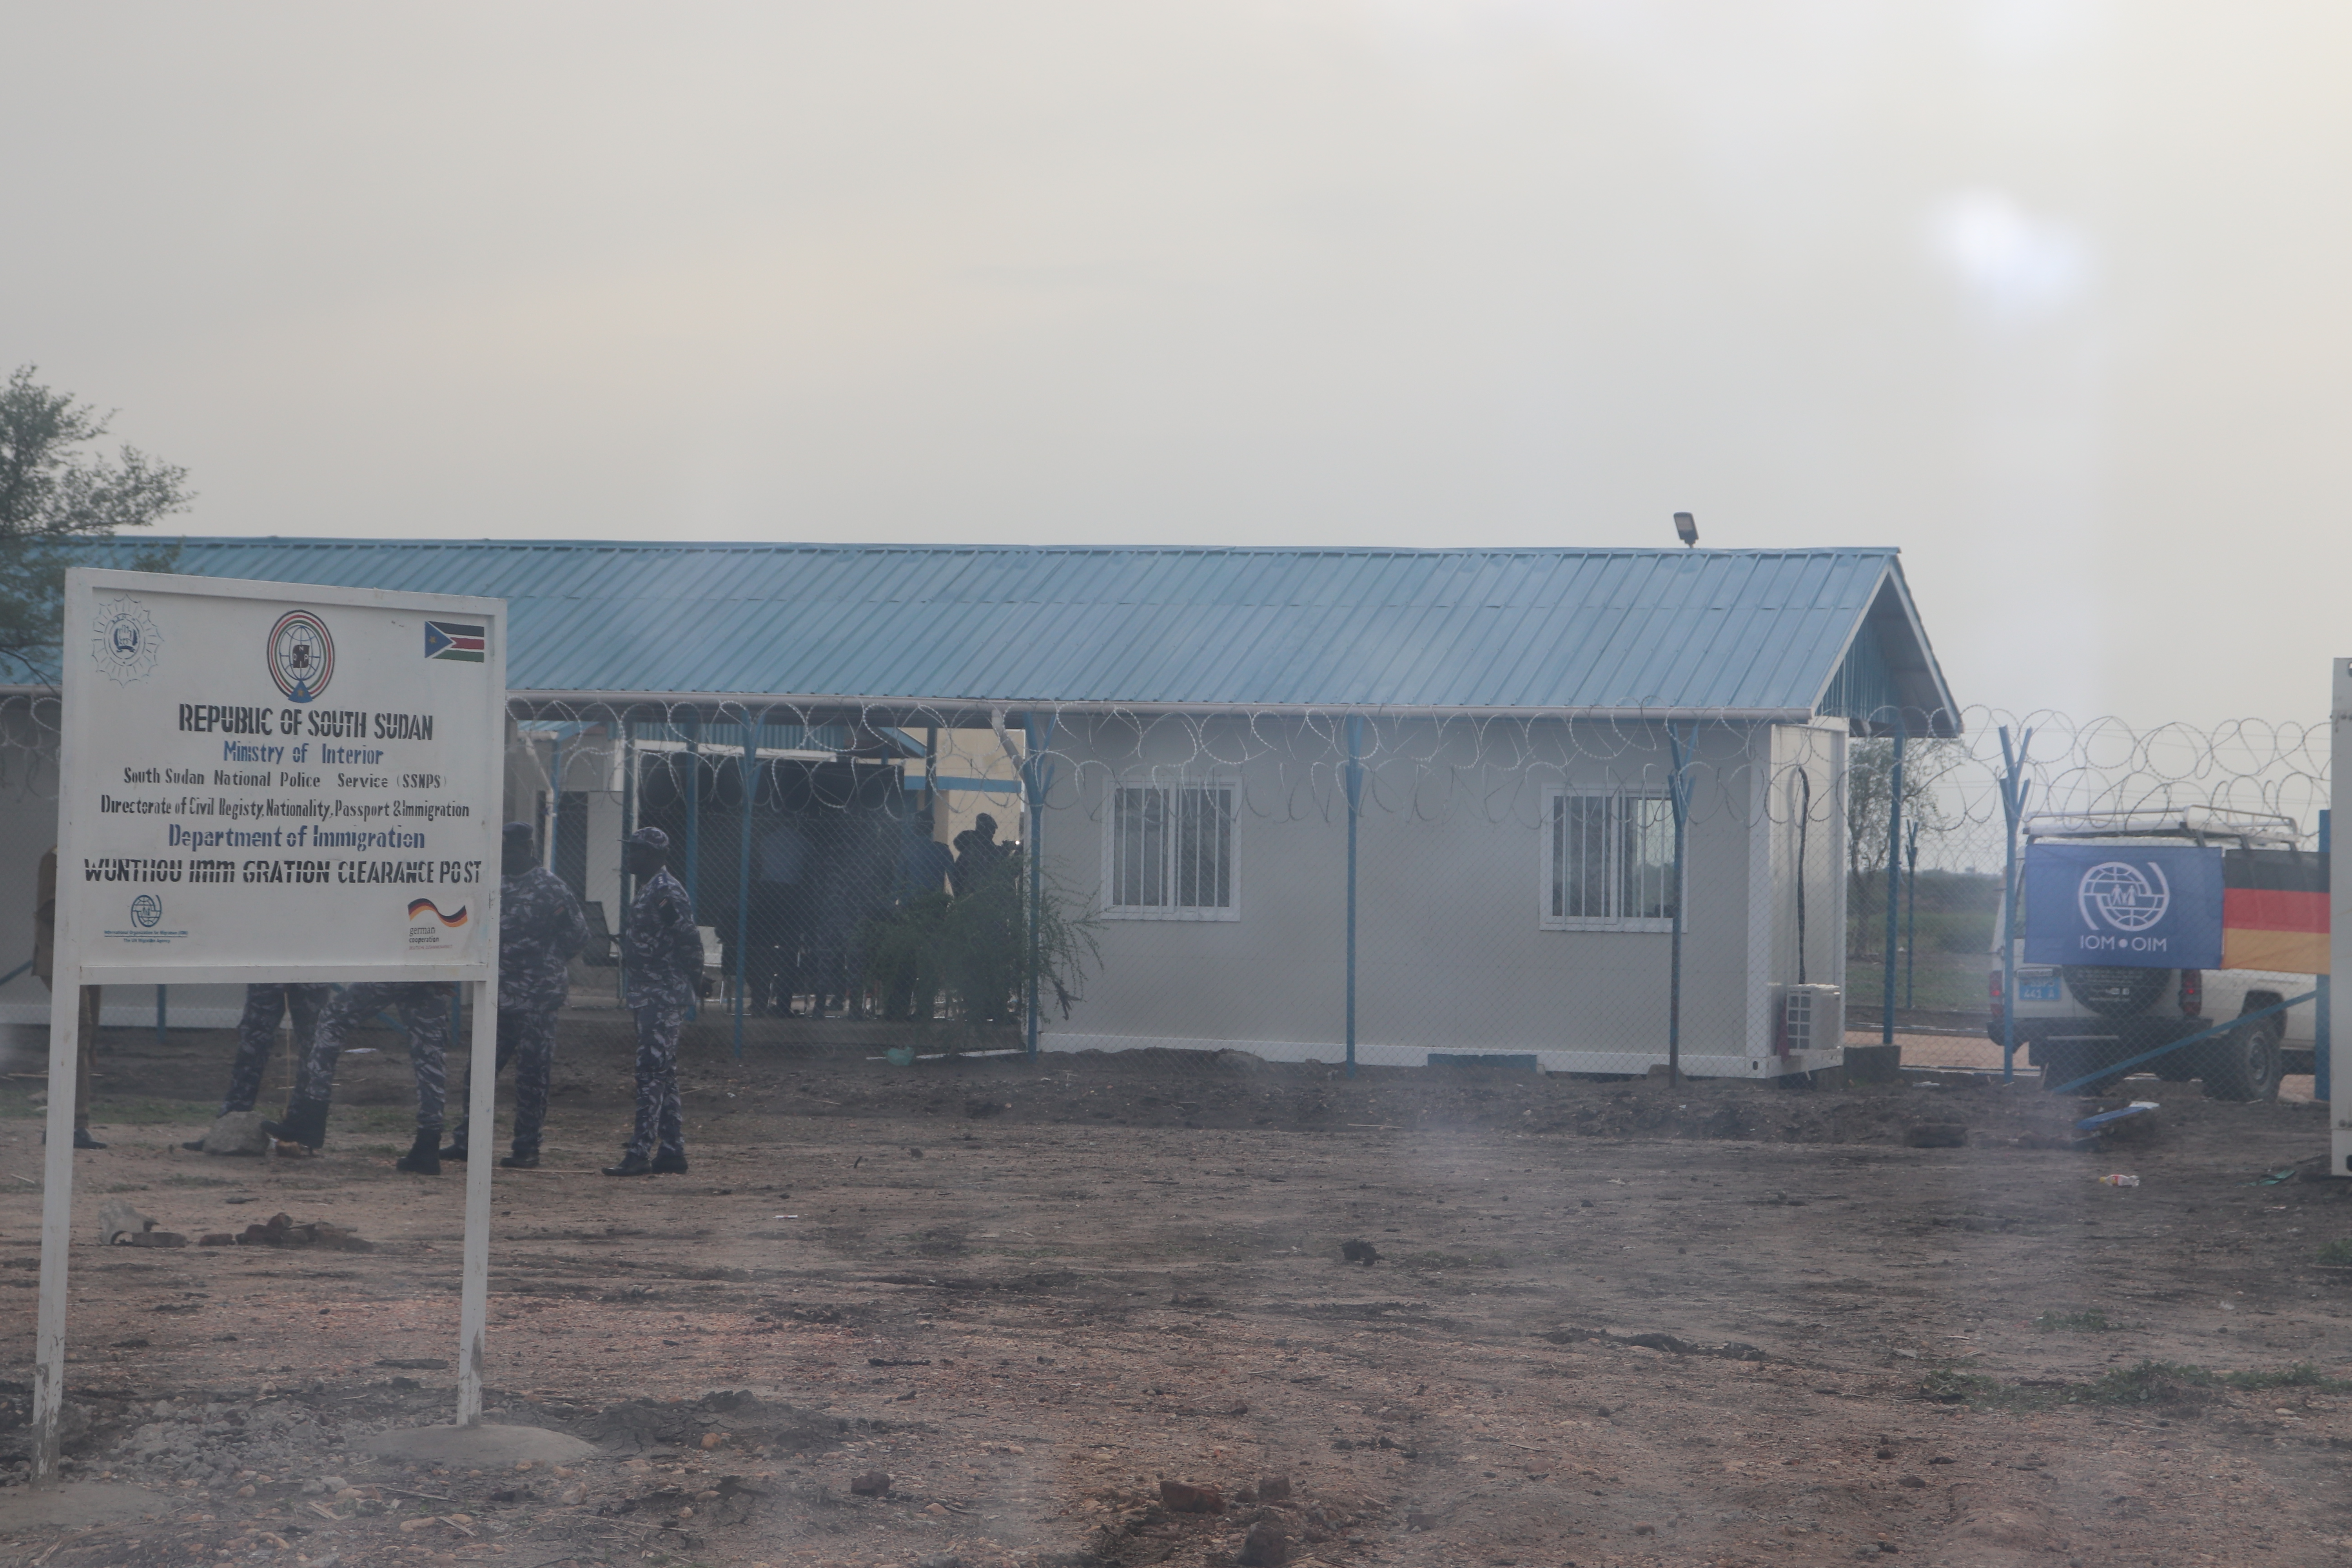 Wunthou border facility in Renk County, Upper Nile State.